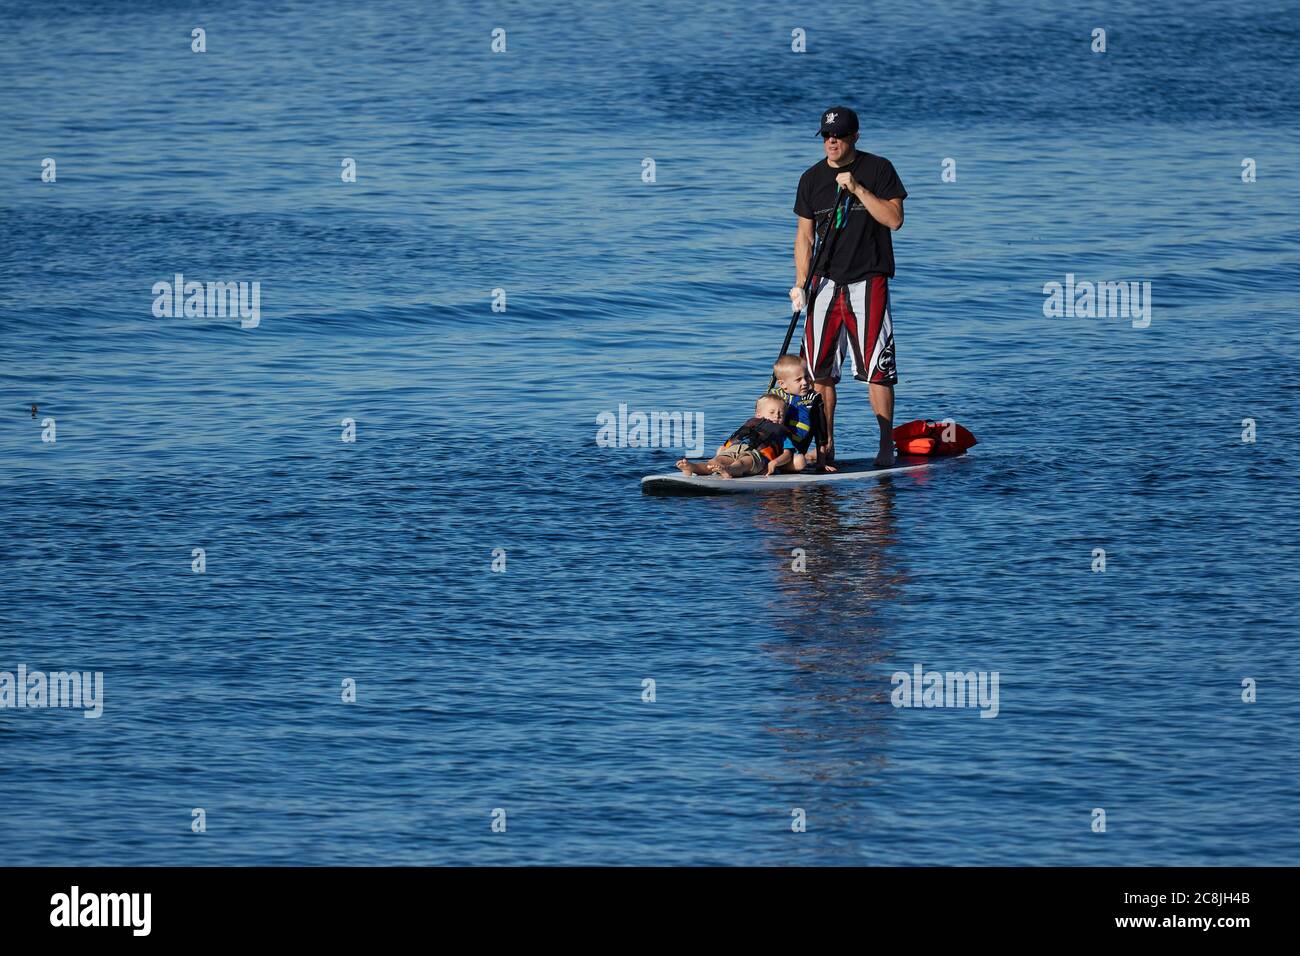 Man With 2 Young Boys On A Paddle Board At Redondo Beach, California, USA. Stock Photo